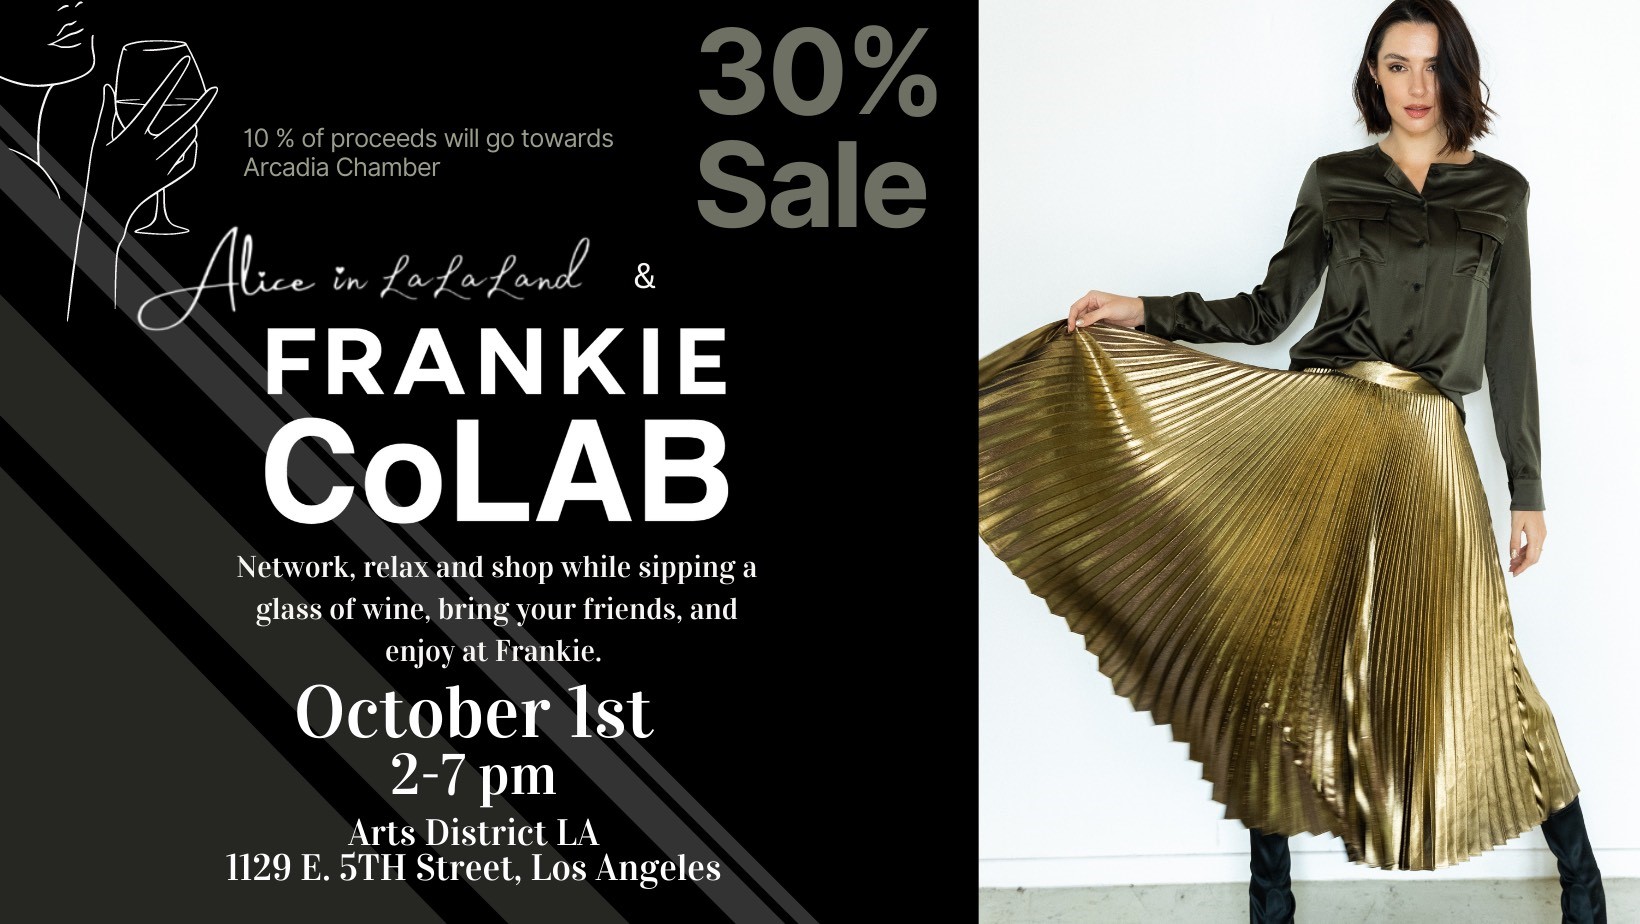 Frankie CoLAB fashion flyer showing a woman in a gold skirt and black top 